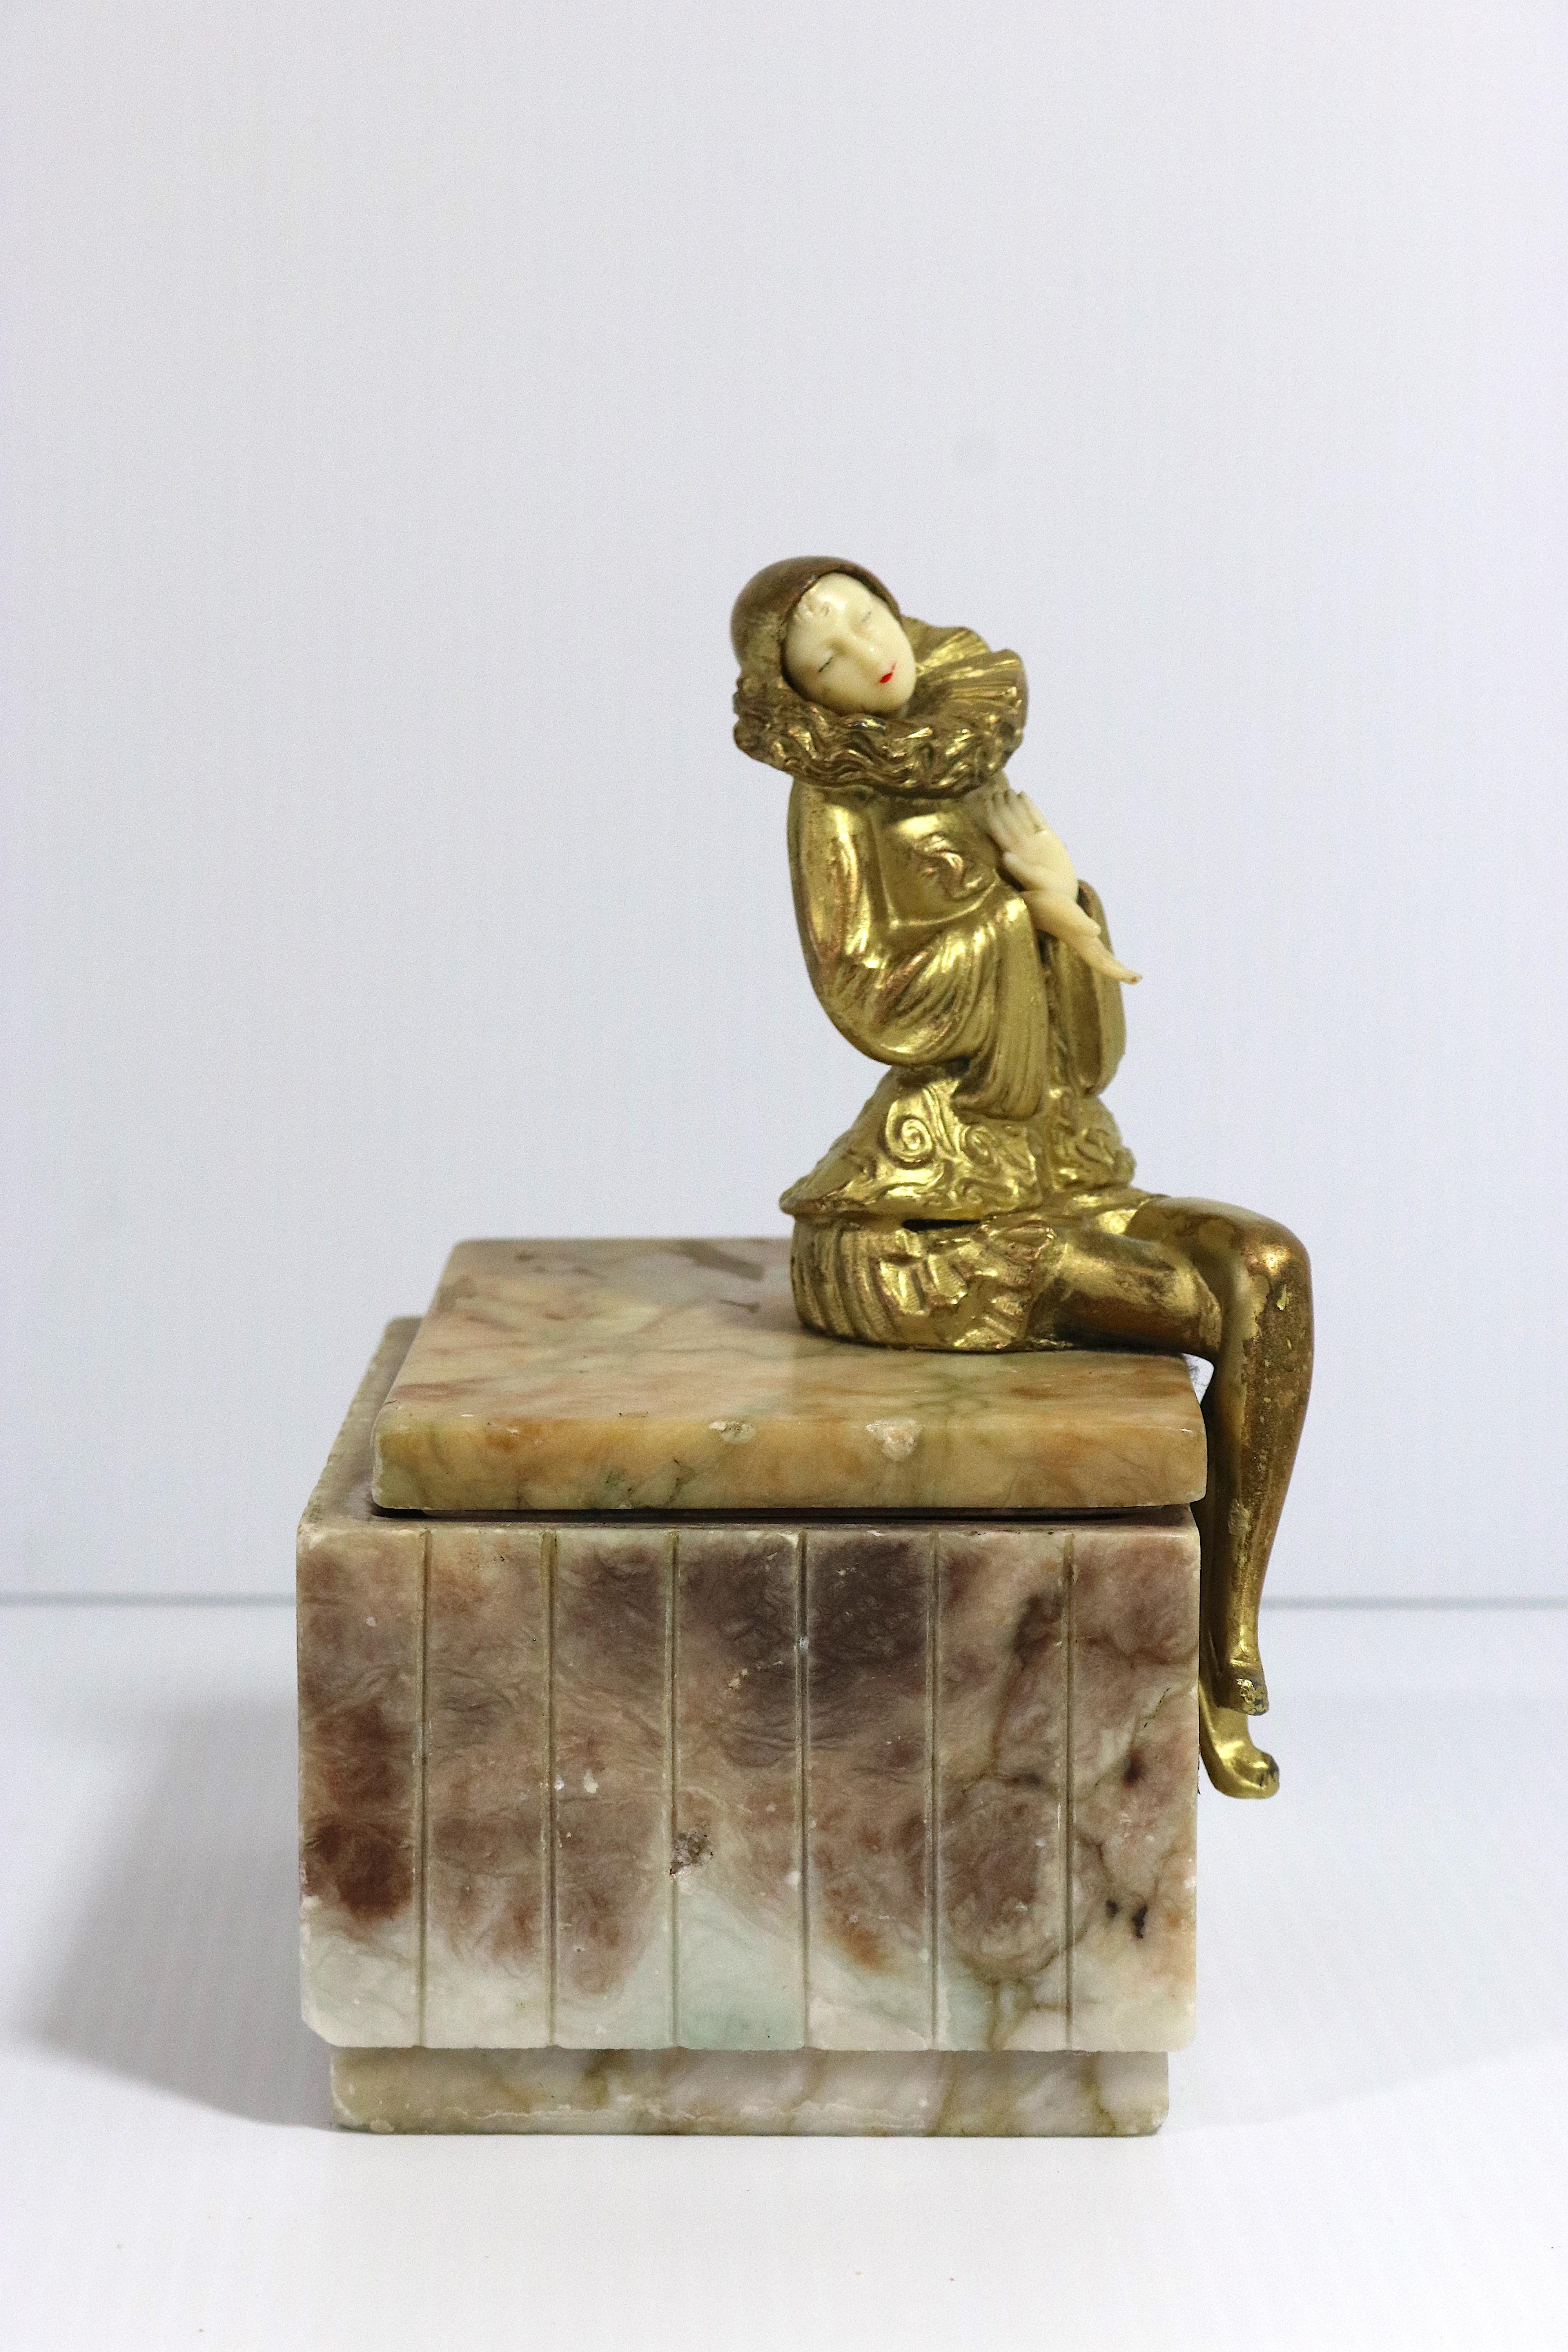 Art Deco Pierette Sculpture on Marble Box after Sculptor Paul Phillipe  In Good Condition For Sale In West Palm Beach, FL